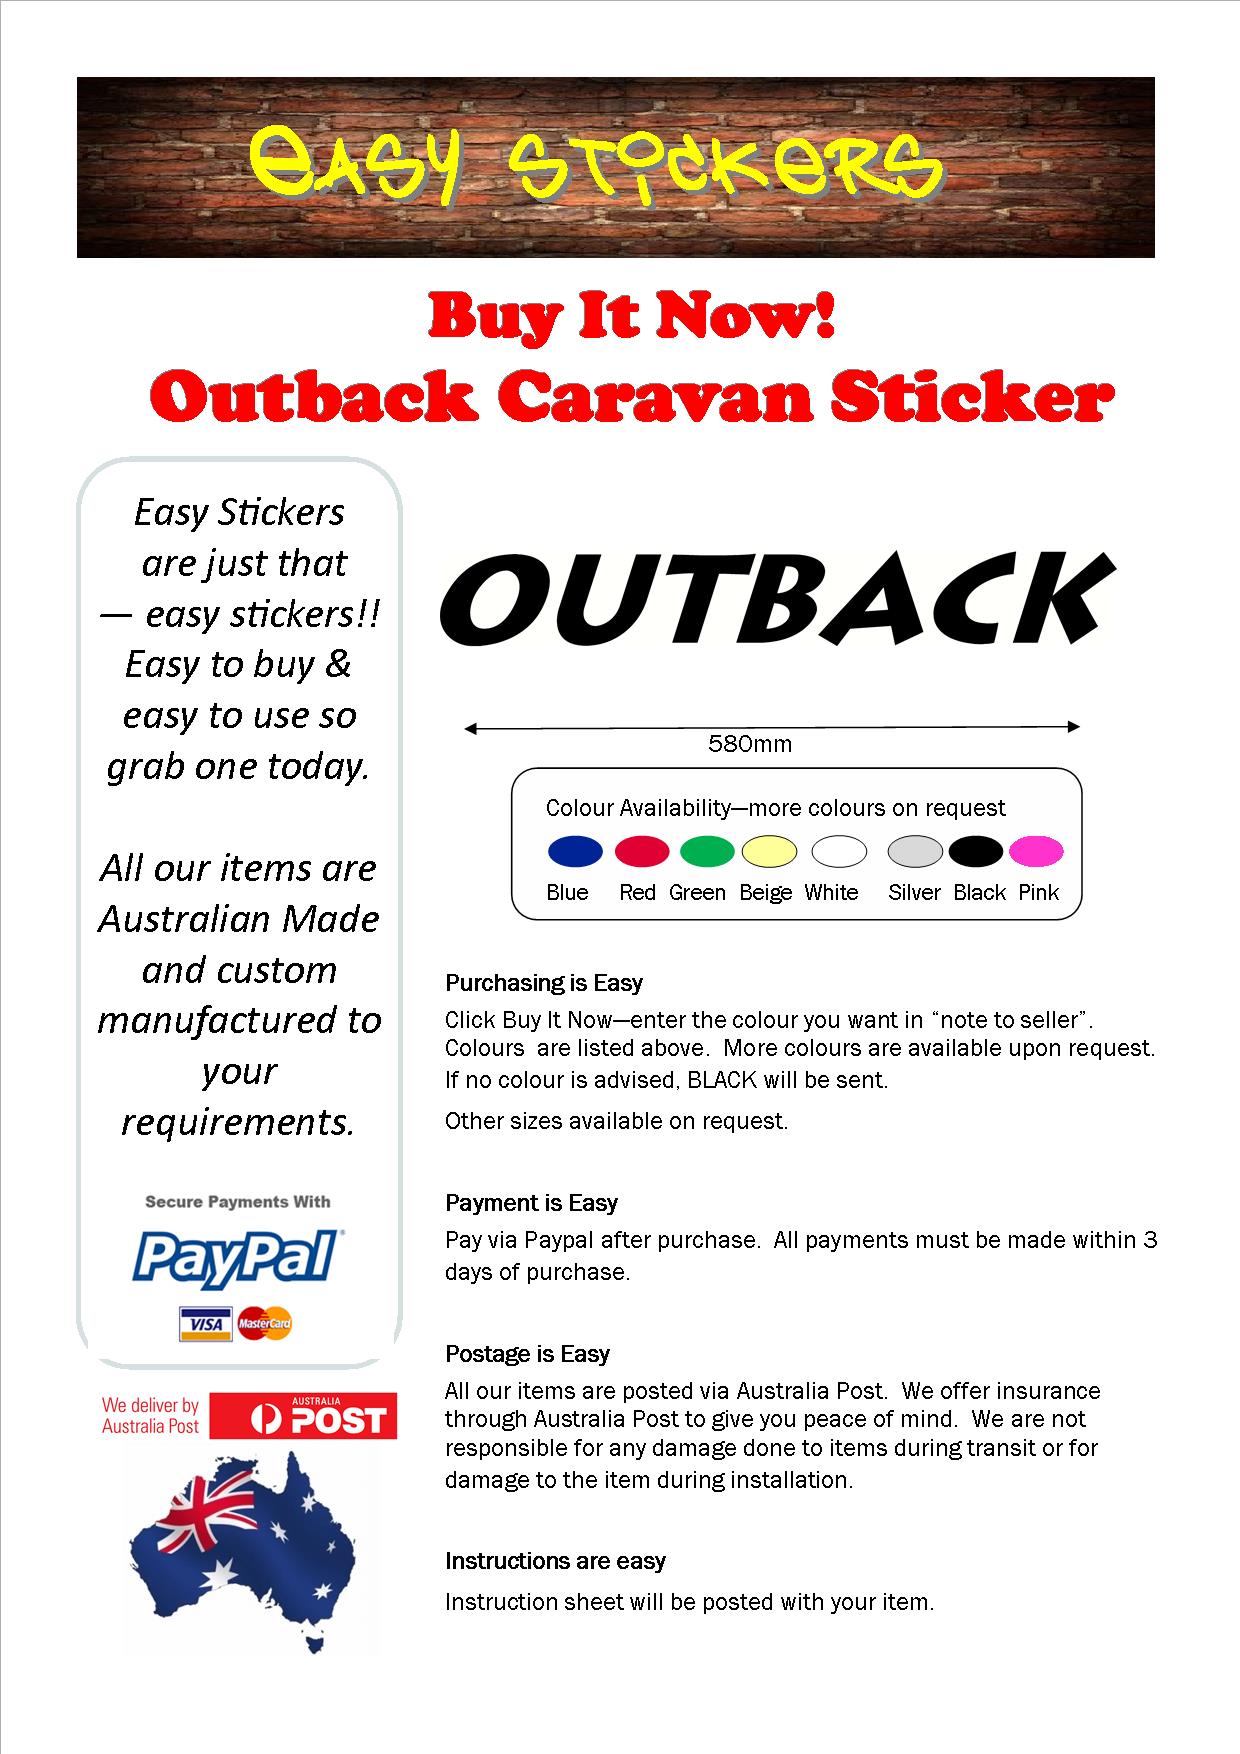 Ebay Template 580mm Outback.jpg  by easystickers